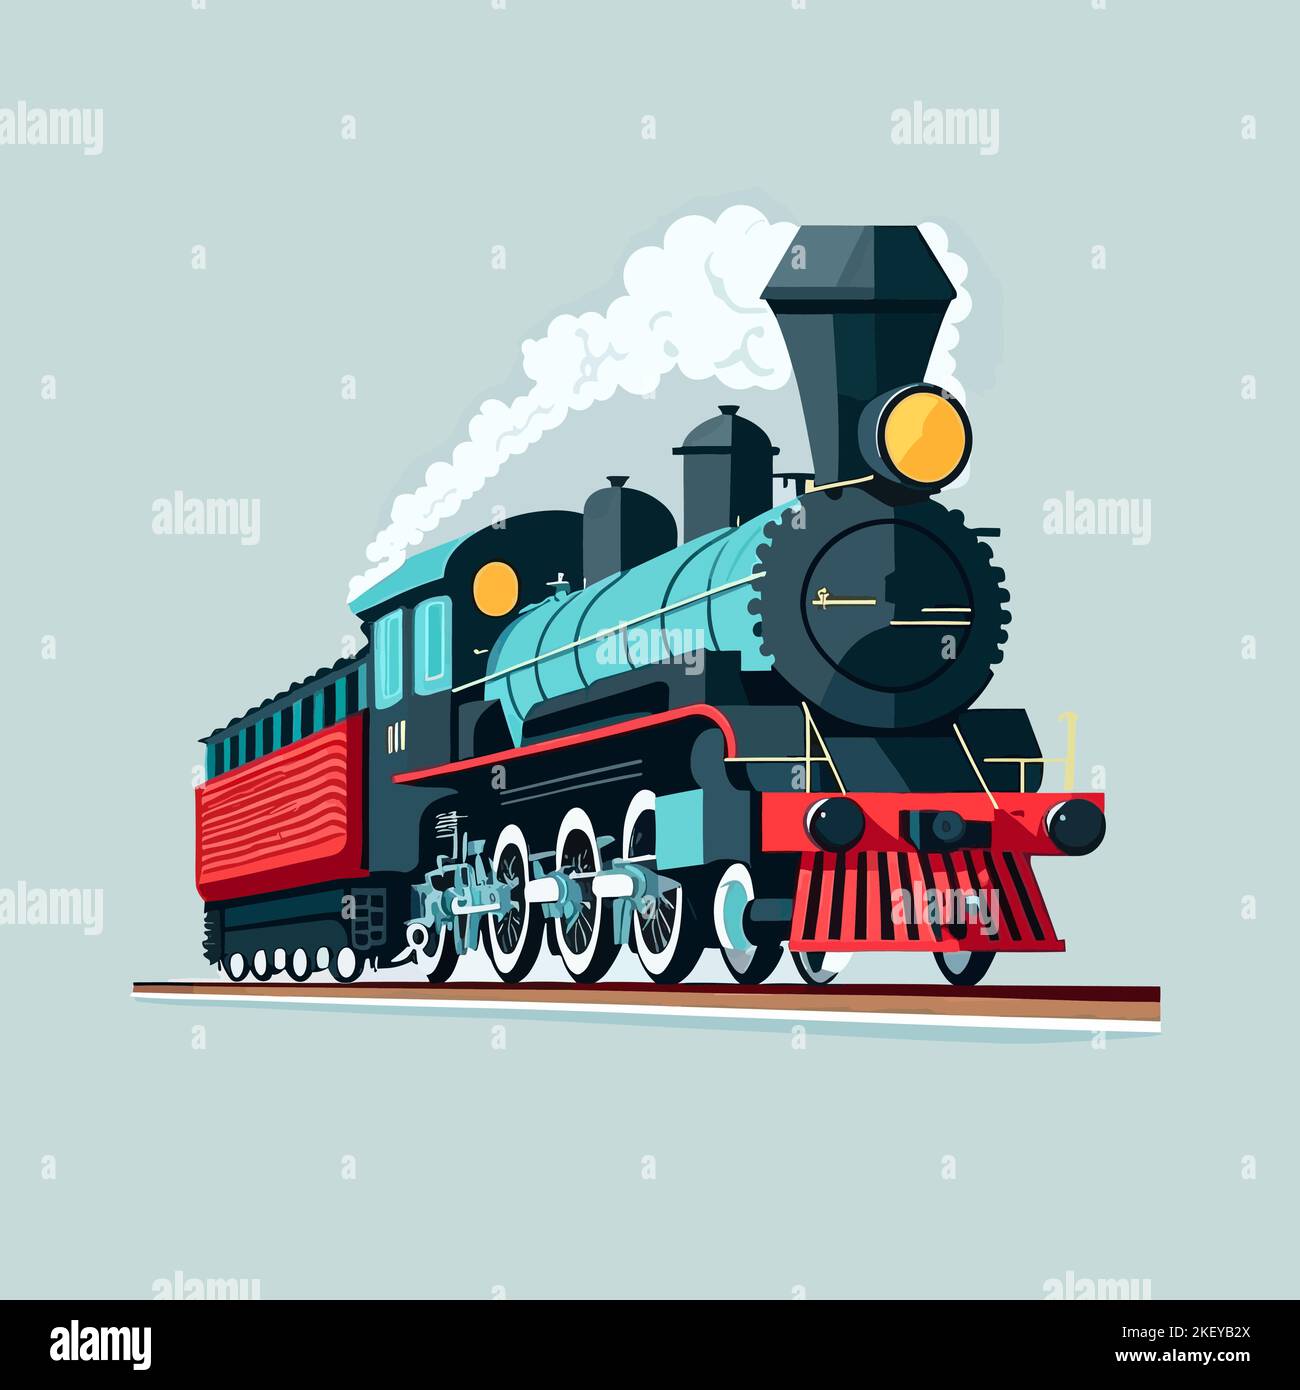 Retro style illustration of a vintage steam engine train or locomotive  going towards the viewer with sunburst in background on isolated background  Stock Vector Image & Art - Alamy